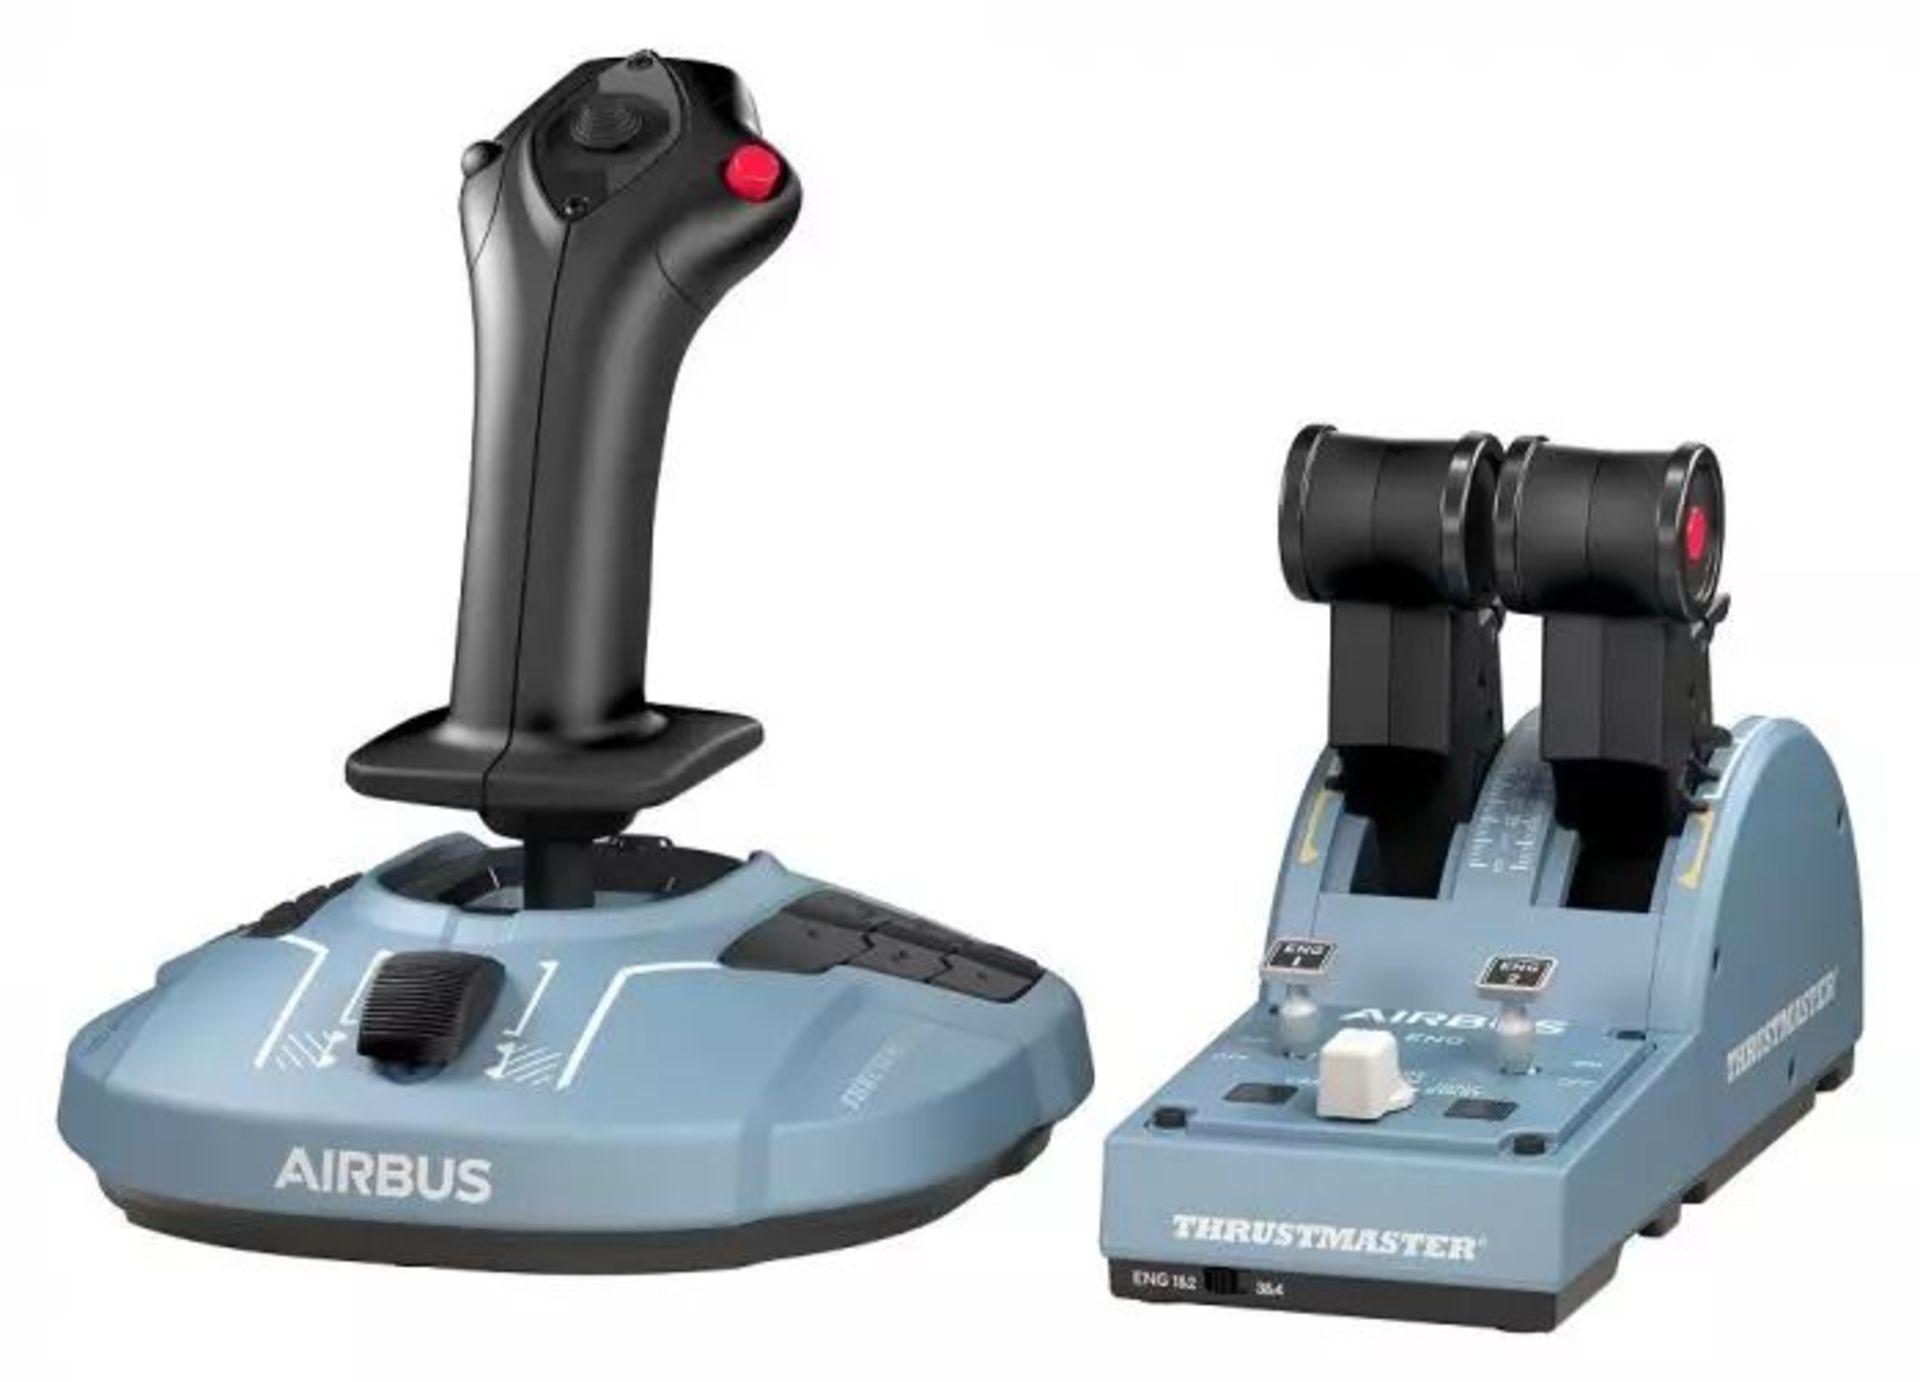 Thrustmaster TCA Officer Pack Airbus Edition. RRP £399.00. ER21. Ergonomic replicas of the world-